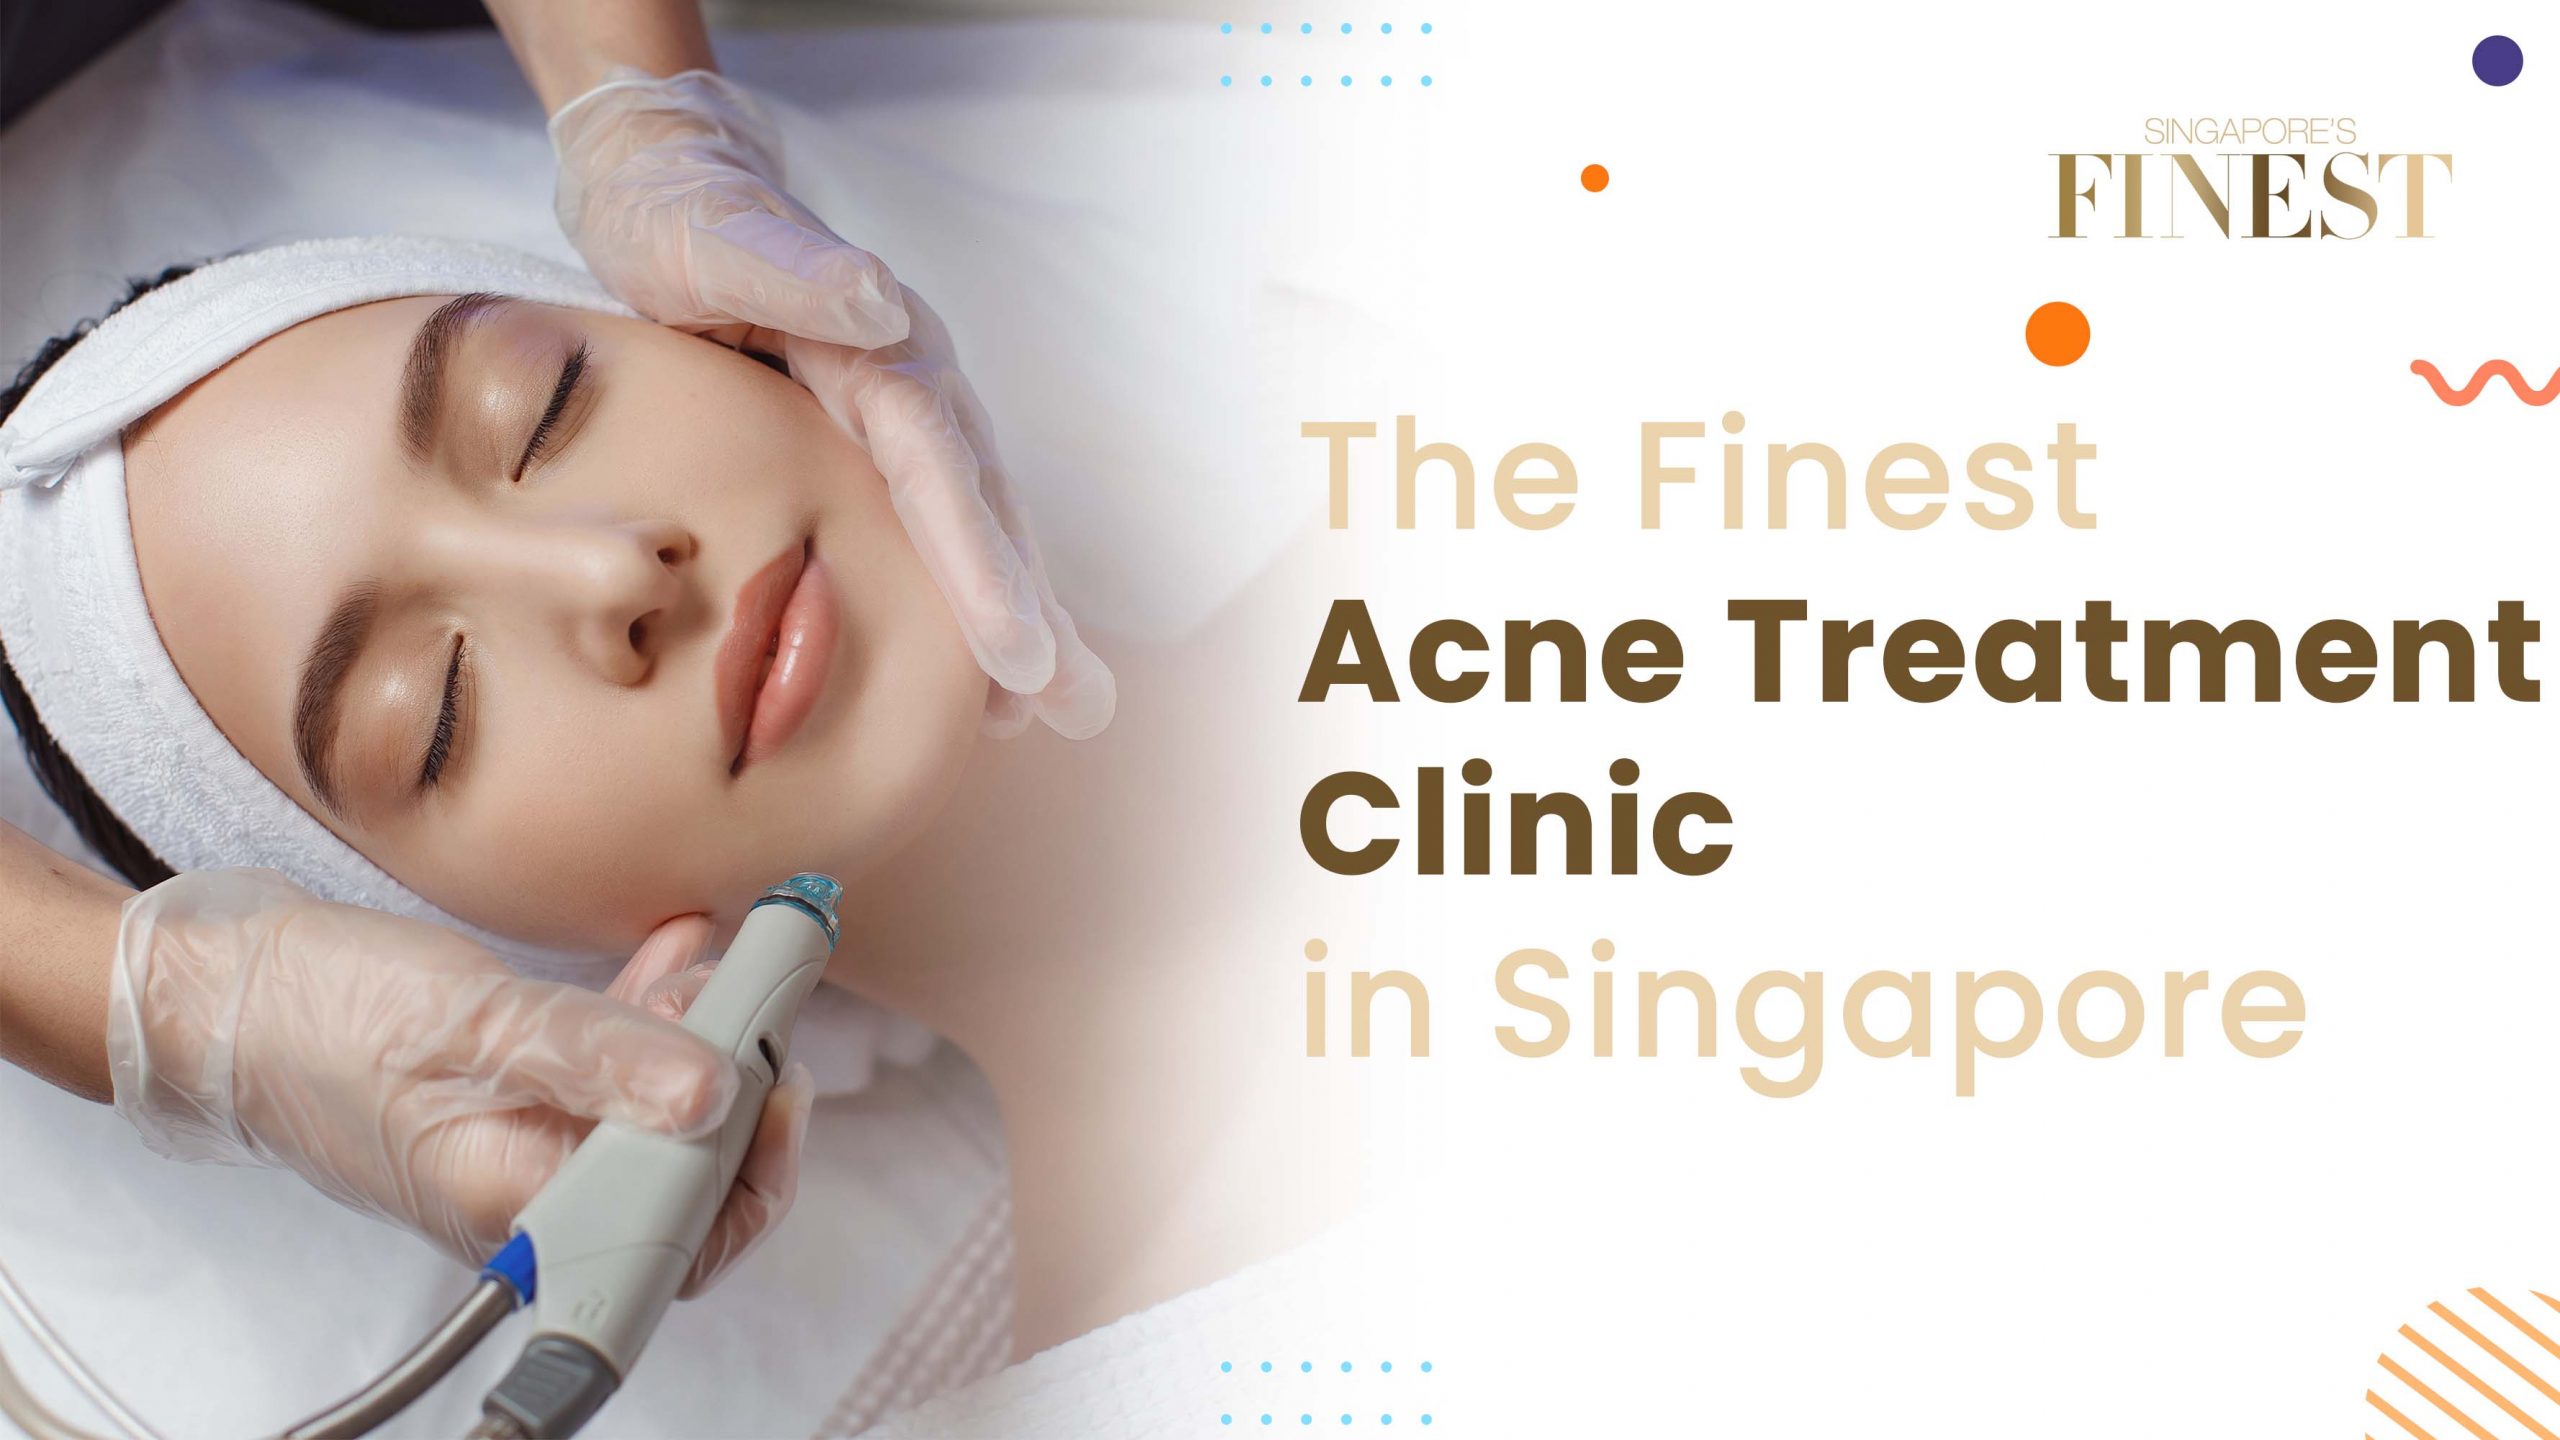 Finest Acne Treatment Clinic in Singapore